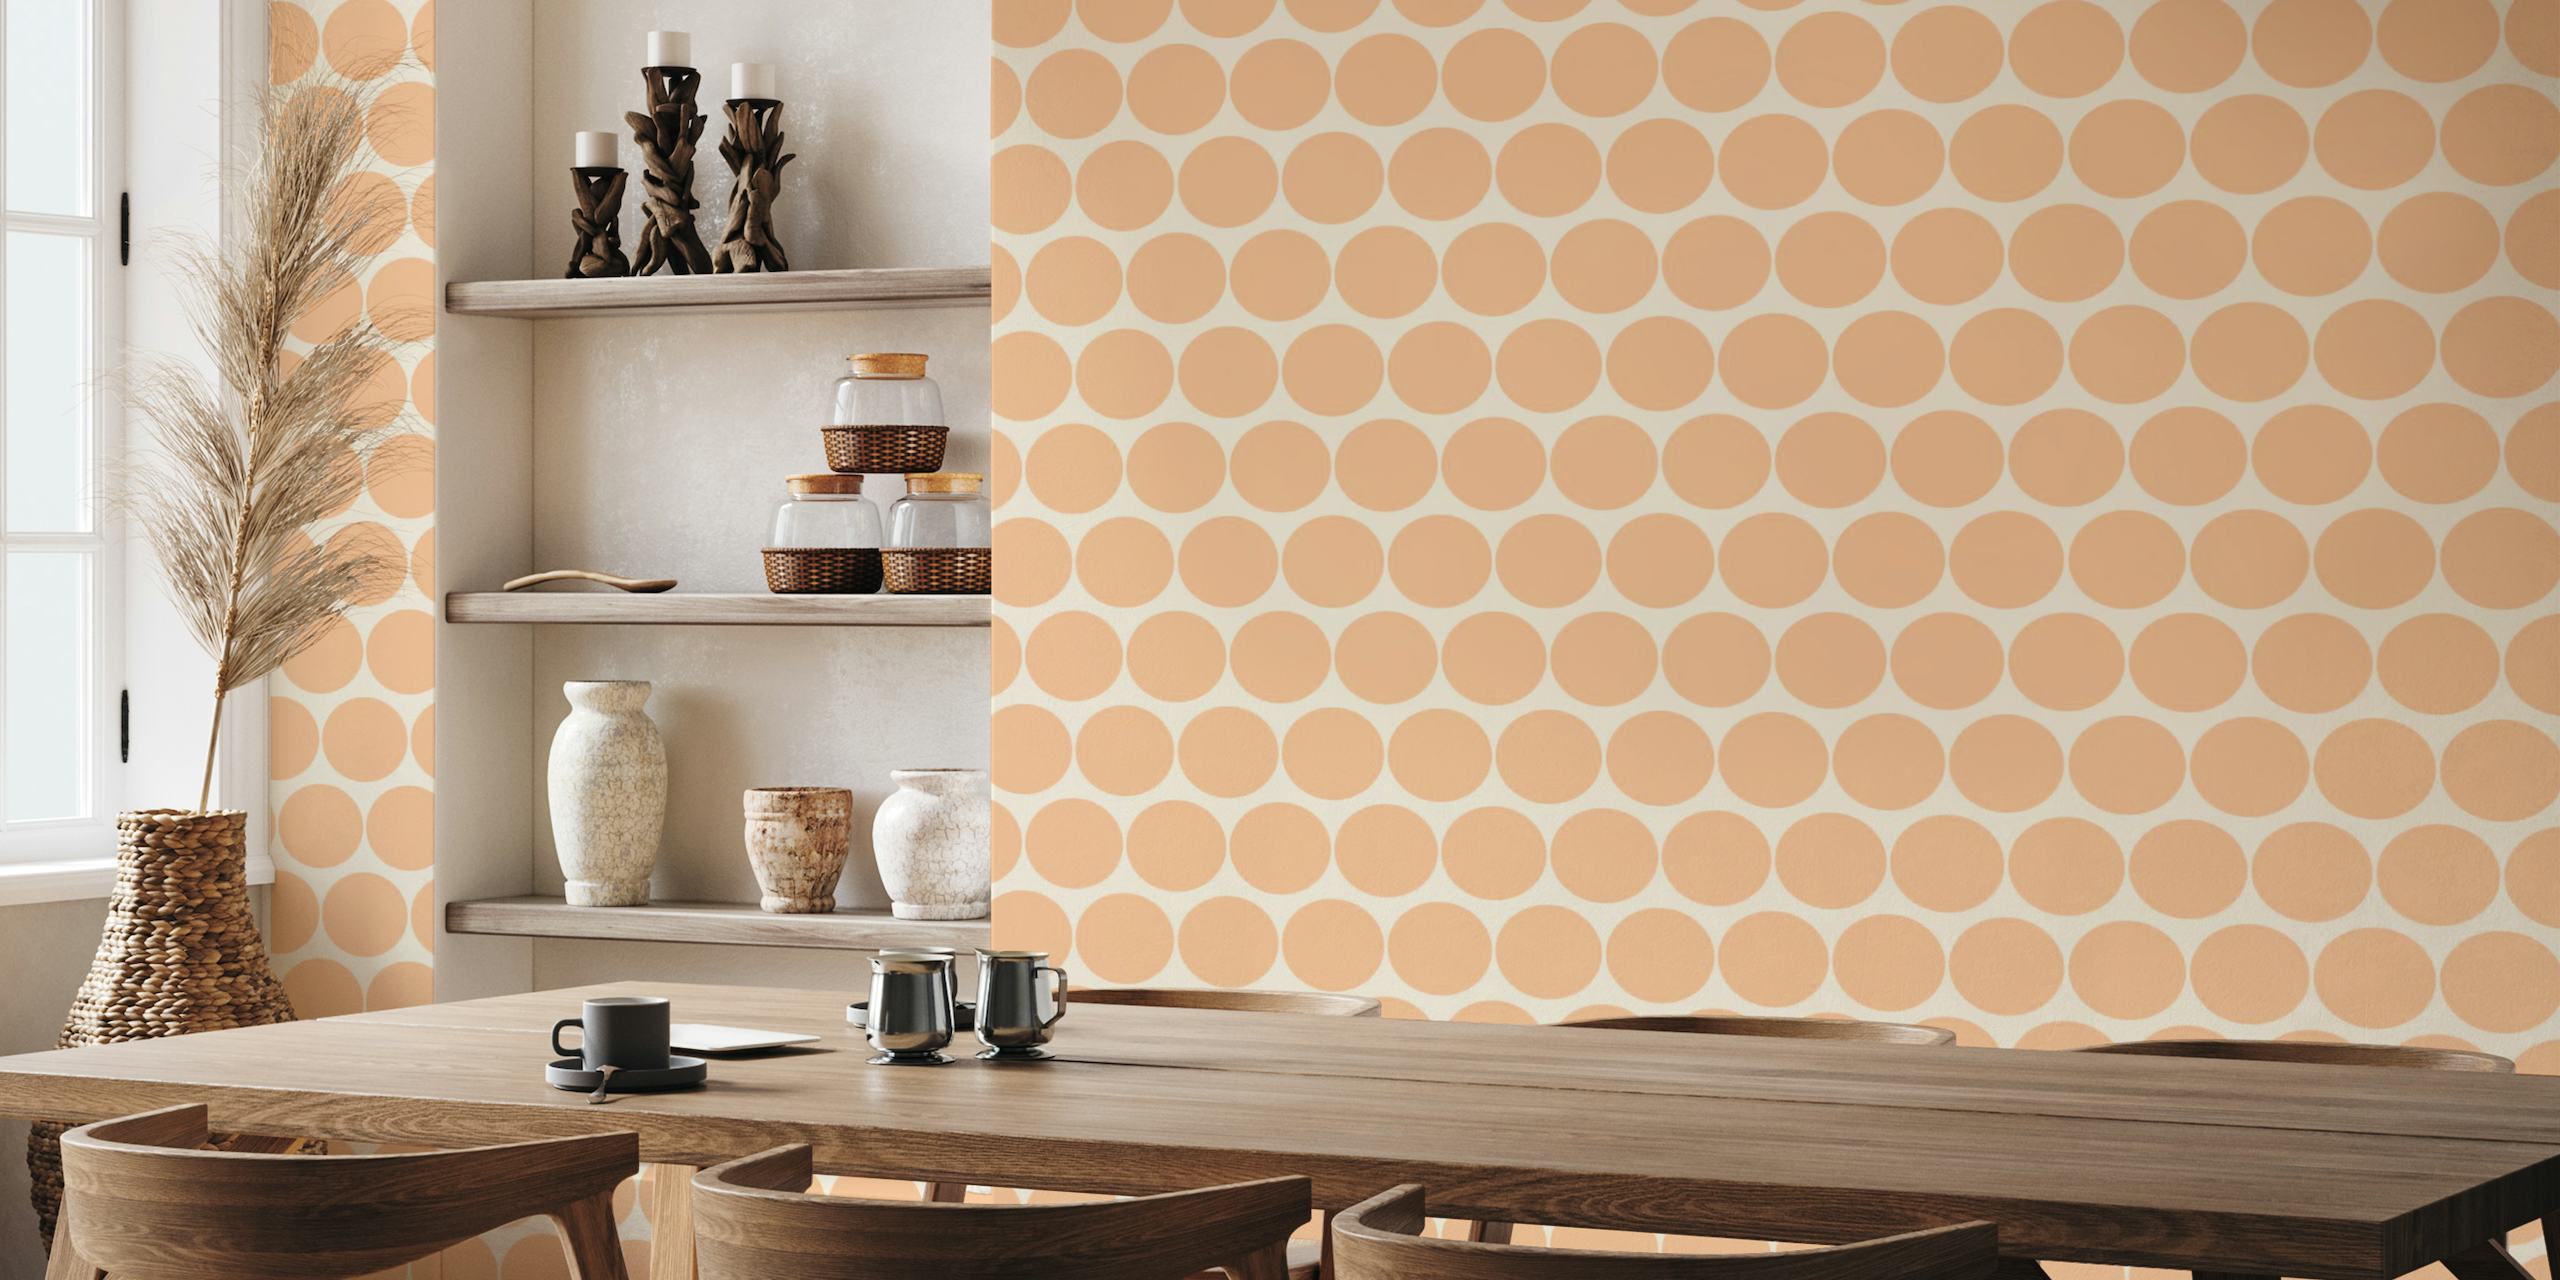 Peach-colored dots mural from Happywall